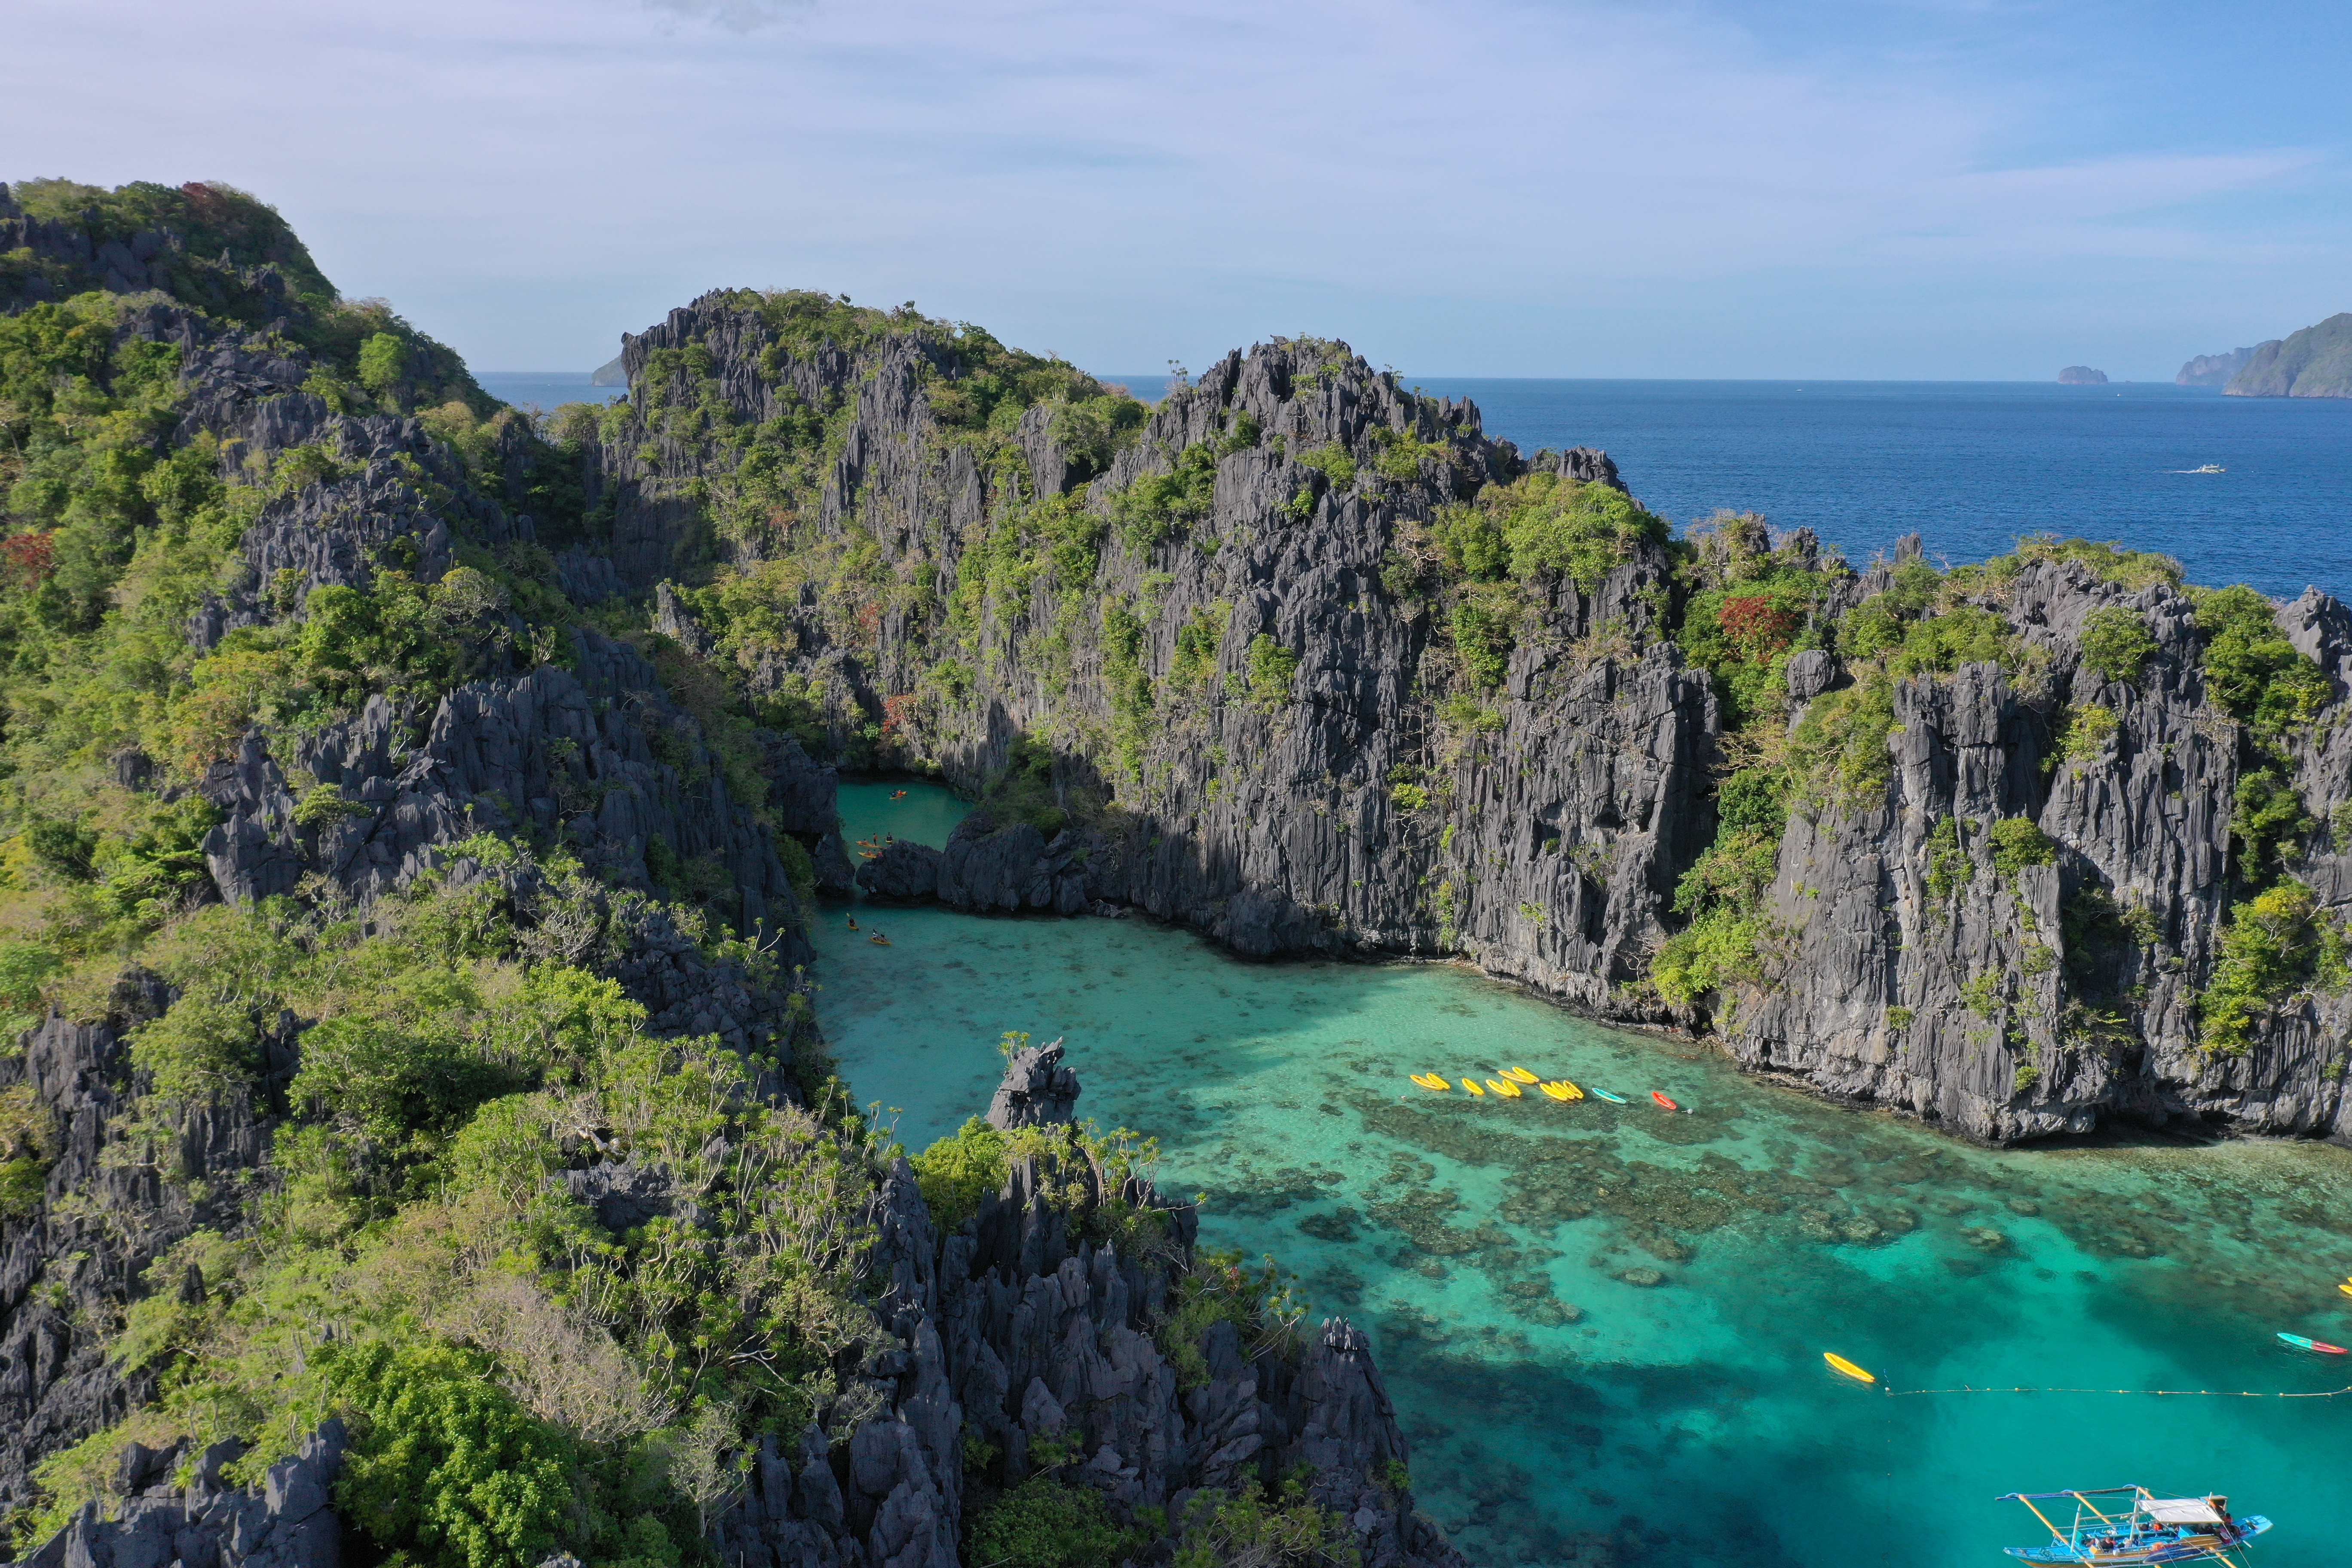 This cliff diving competition puts the spotlight on El Nido as its new location